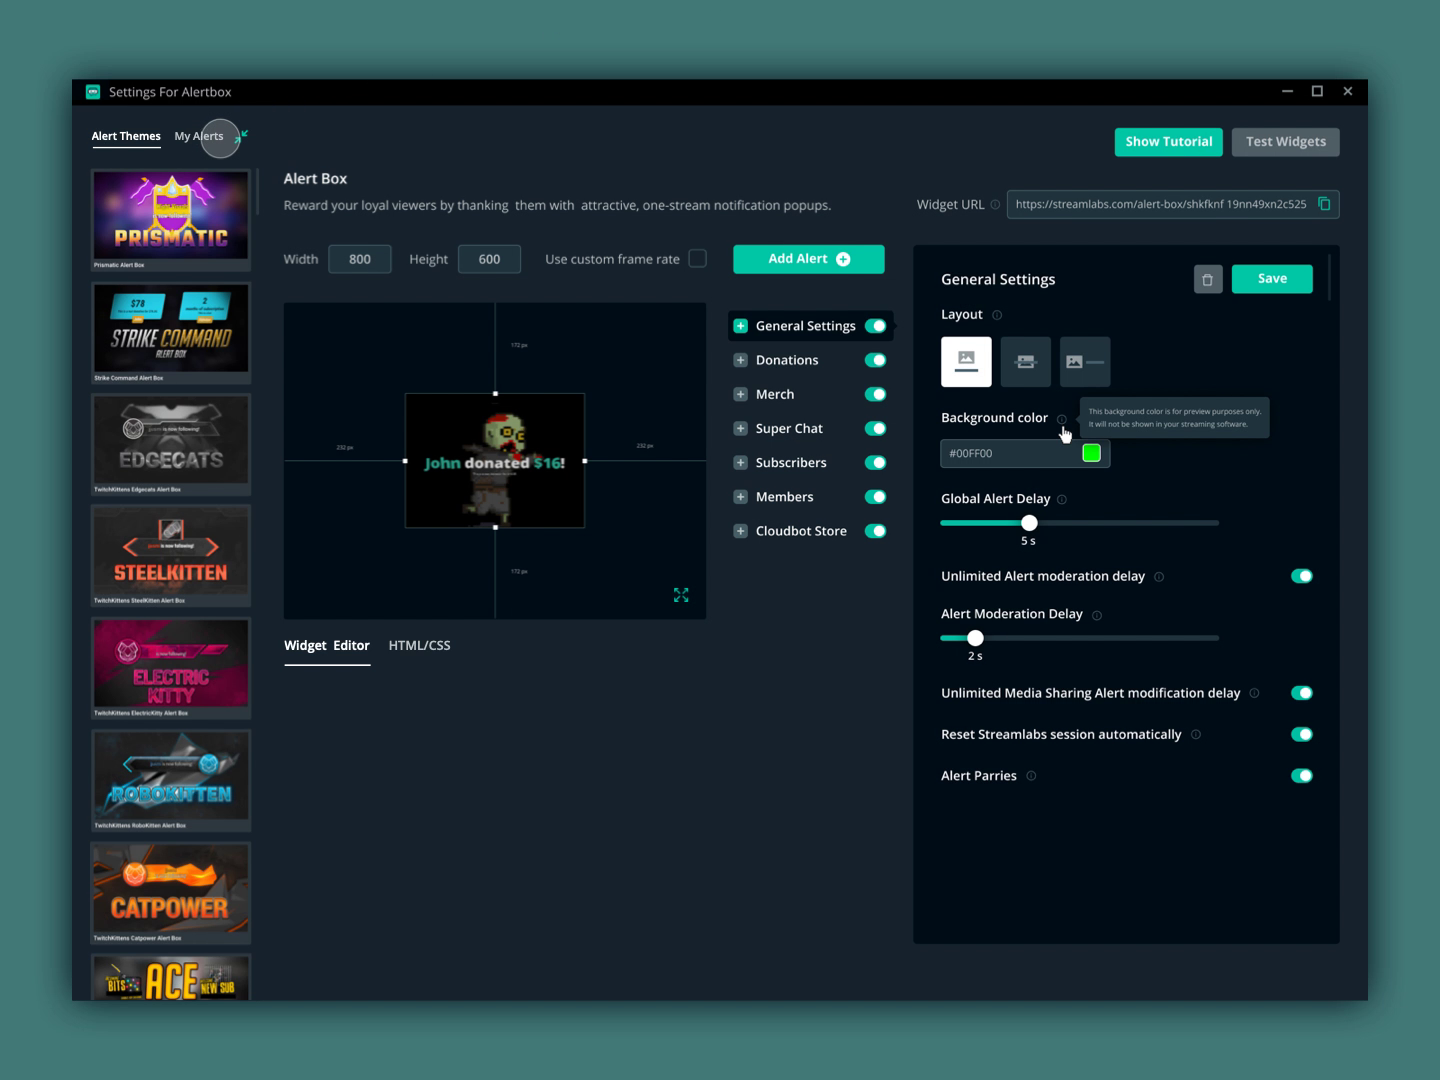 Alertbox settings redesign for Streamlabs by Juless Design